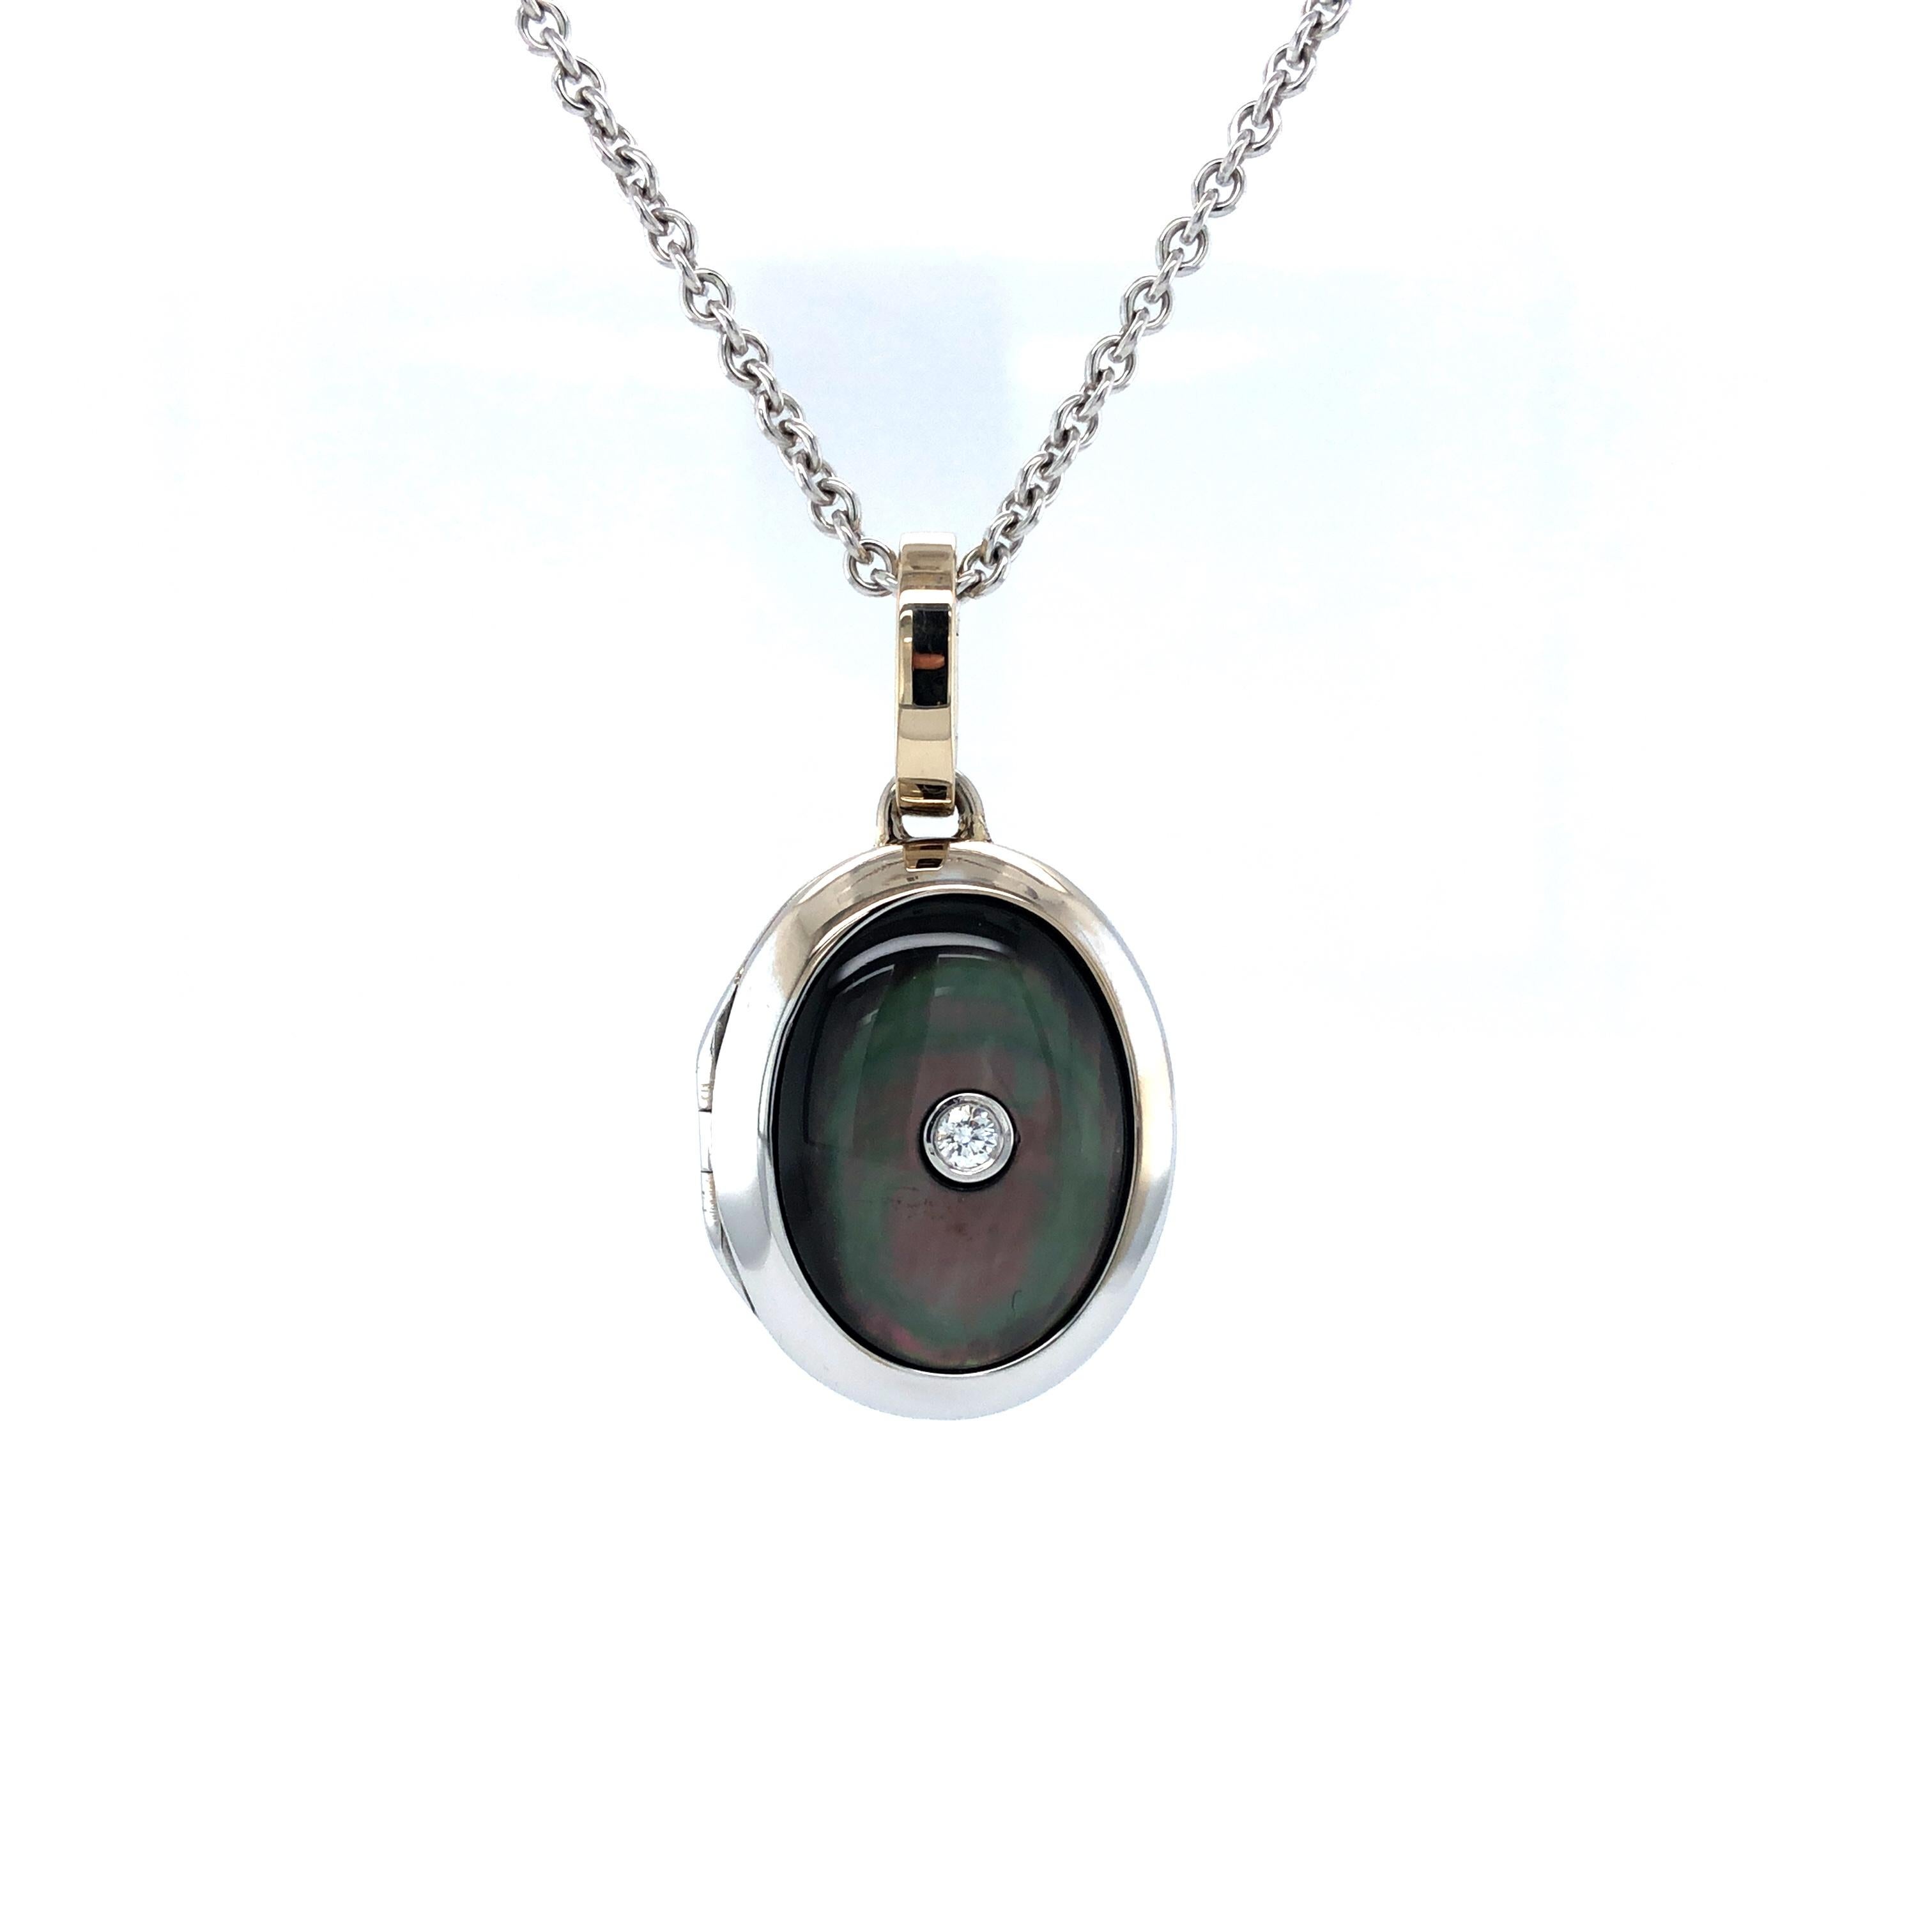 Victor Mayer oval pendant locket 18k white gold, 1 diamond, total 0.04 ct, H VS brilliant cut, 1 black mother of pearl inlay

About the creator Victor Mayer
Victor Mayer is internationally renowned for elegant timeless designs and unrivalled